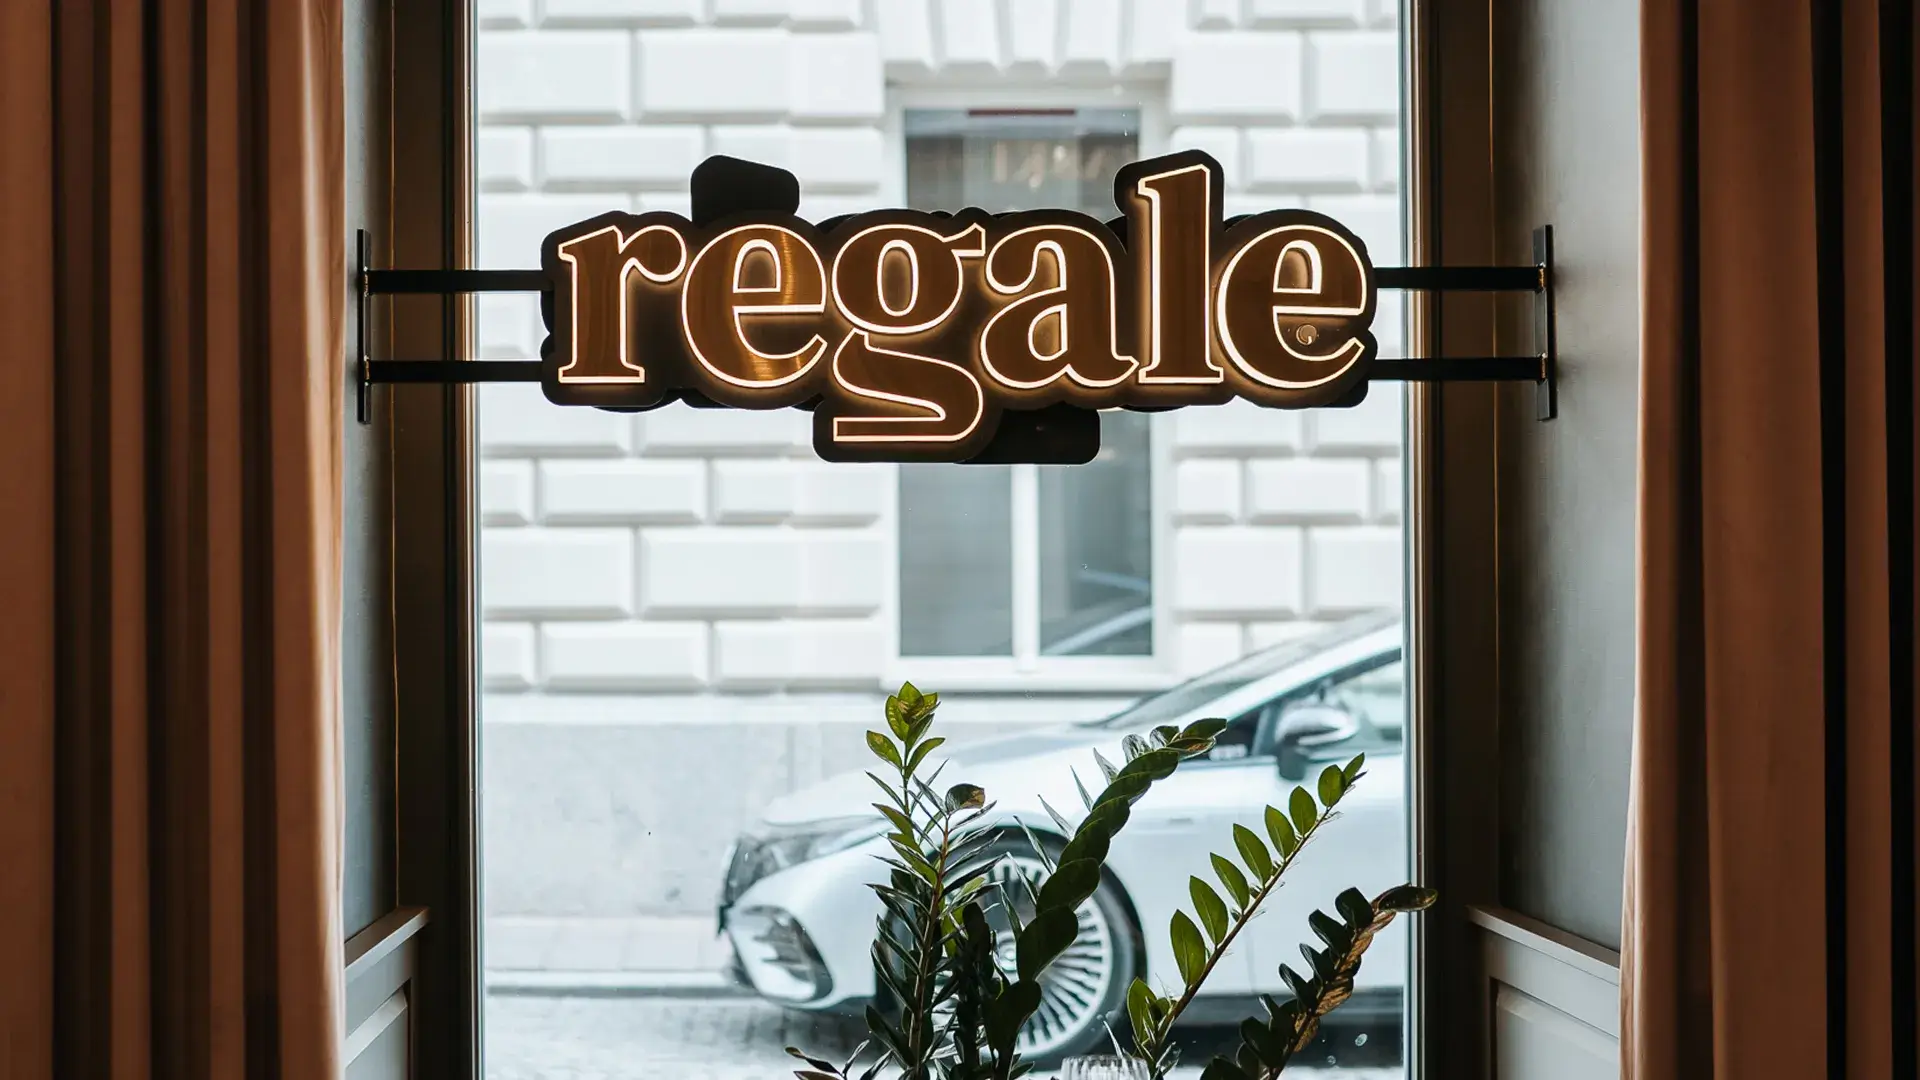 LED letters illuminating the side of Regale